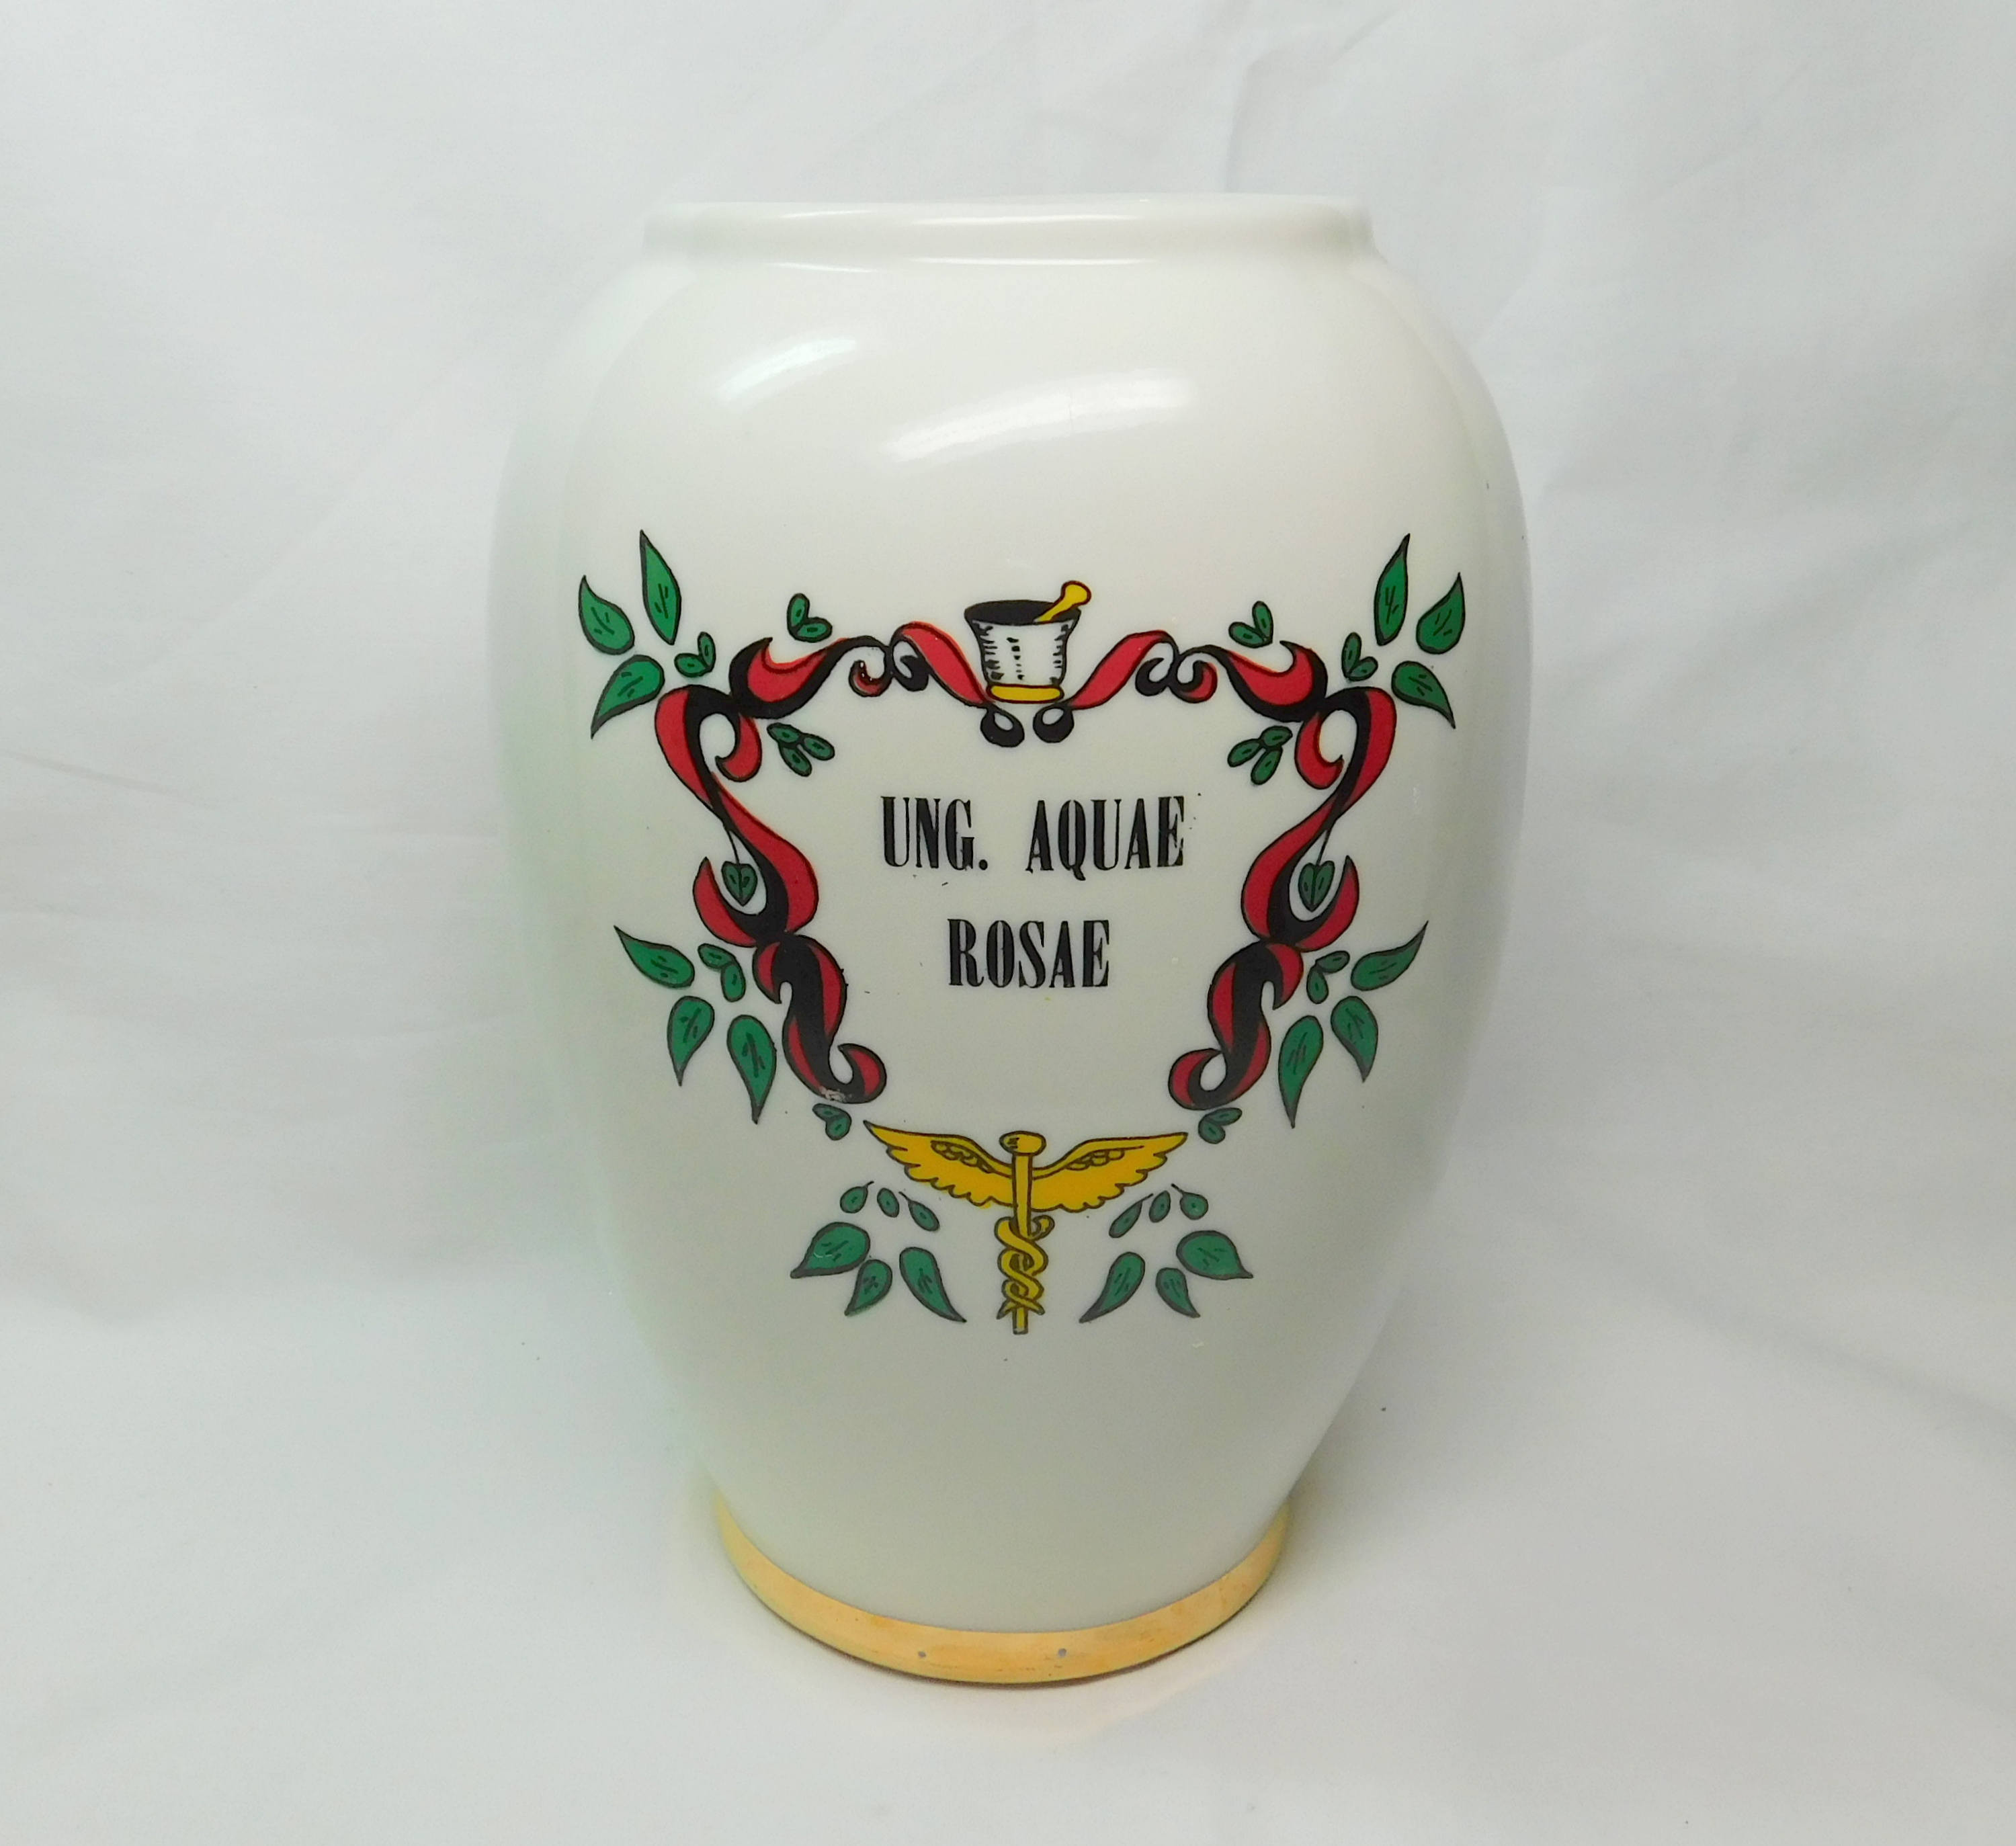 20 Fabulous Chinese Porcelain Vases for Sale 2022 free download chinese porcelain vases for sale of vintage fashioned by blair apothecary porcelain vase latin ung etsy within dc29fc294c28ezoom